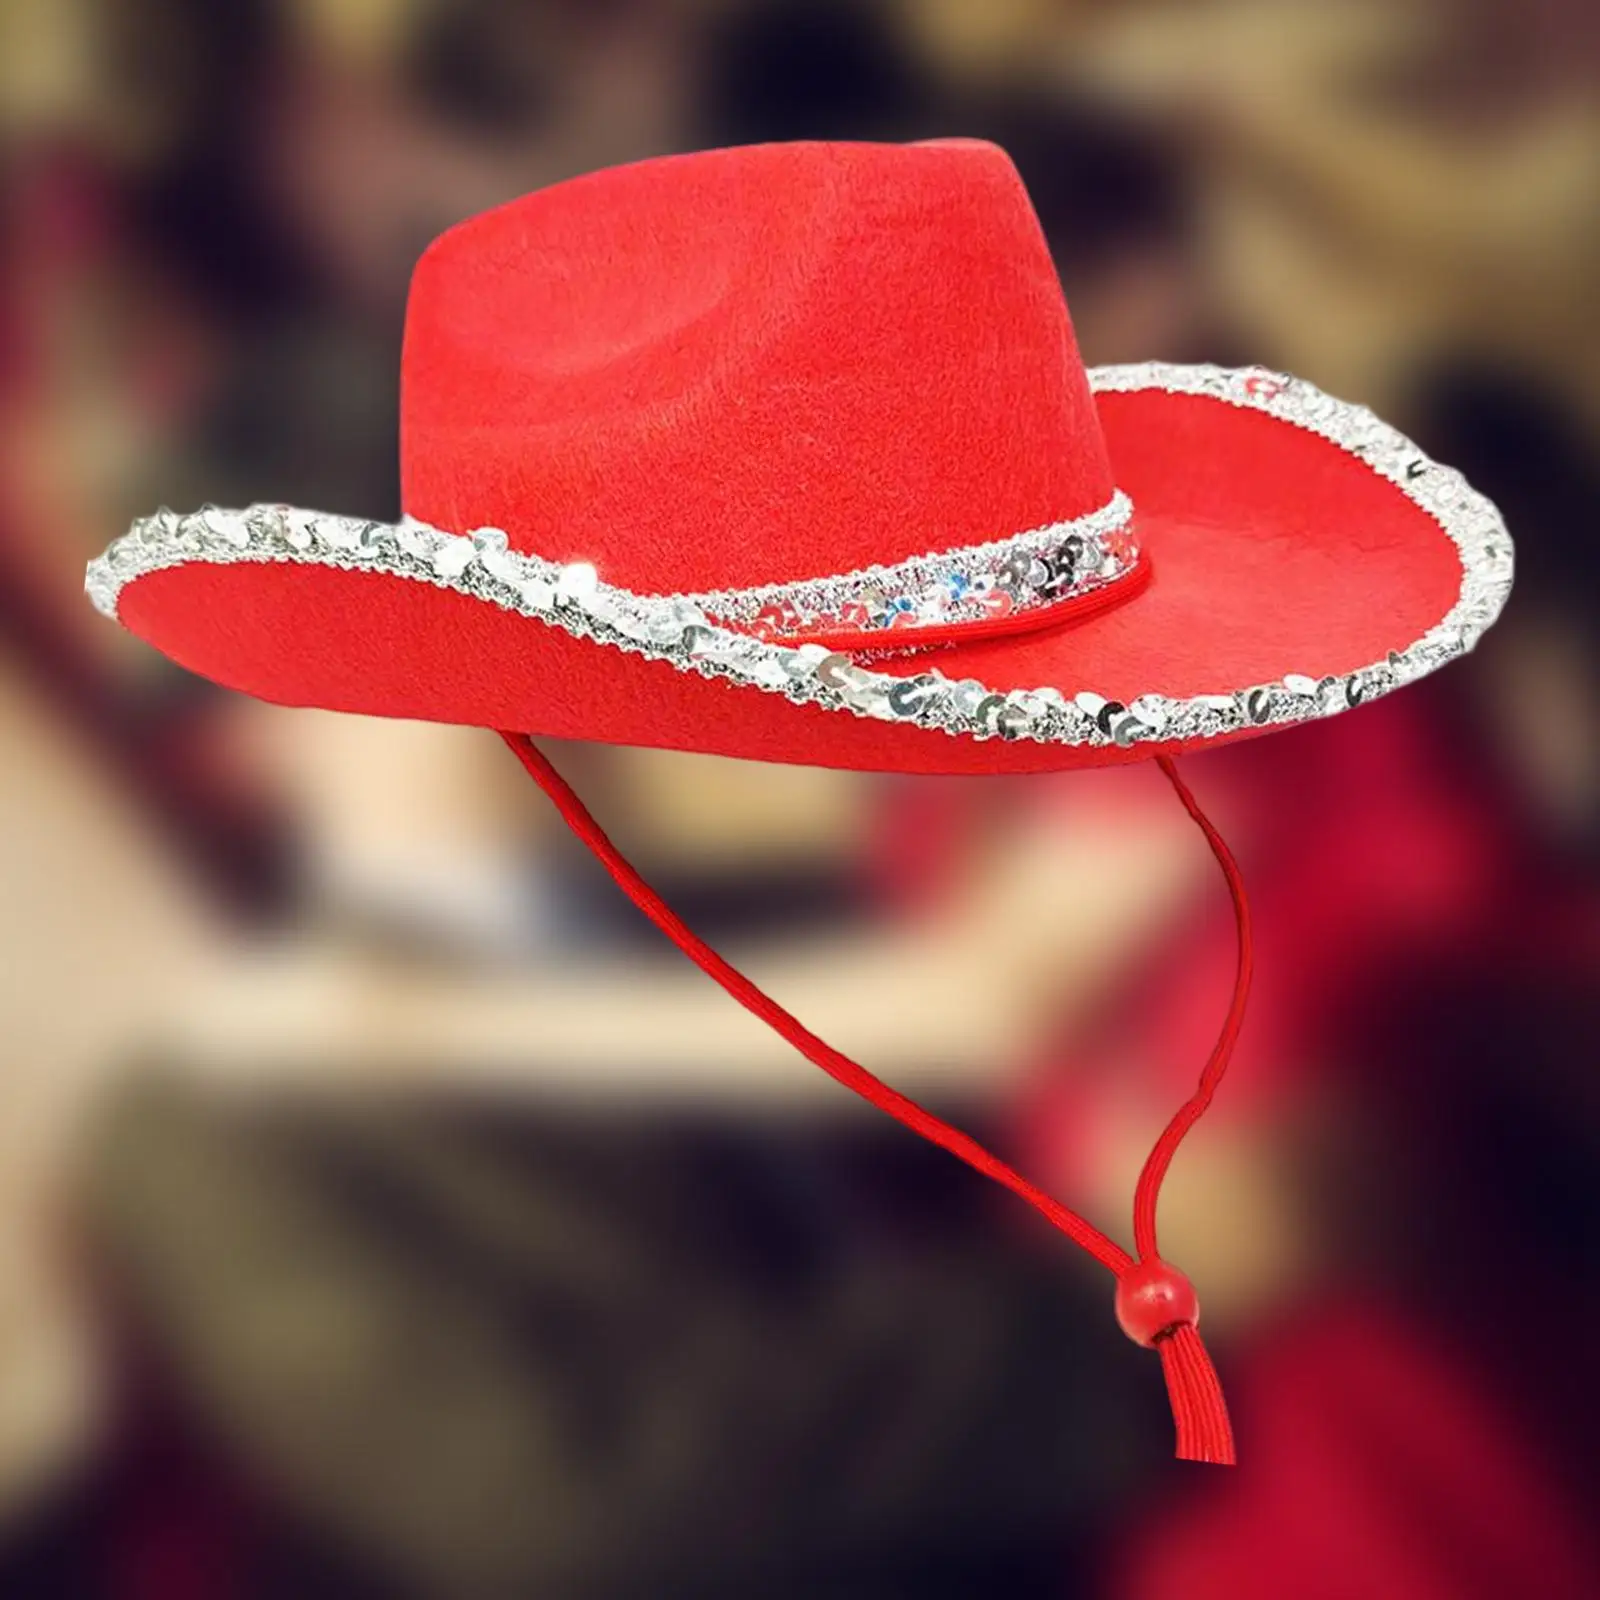 Western Cowboy Hat Sequin Edge Novelty Fedora Hat for Holiday Fancy Dress